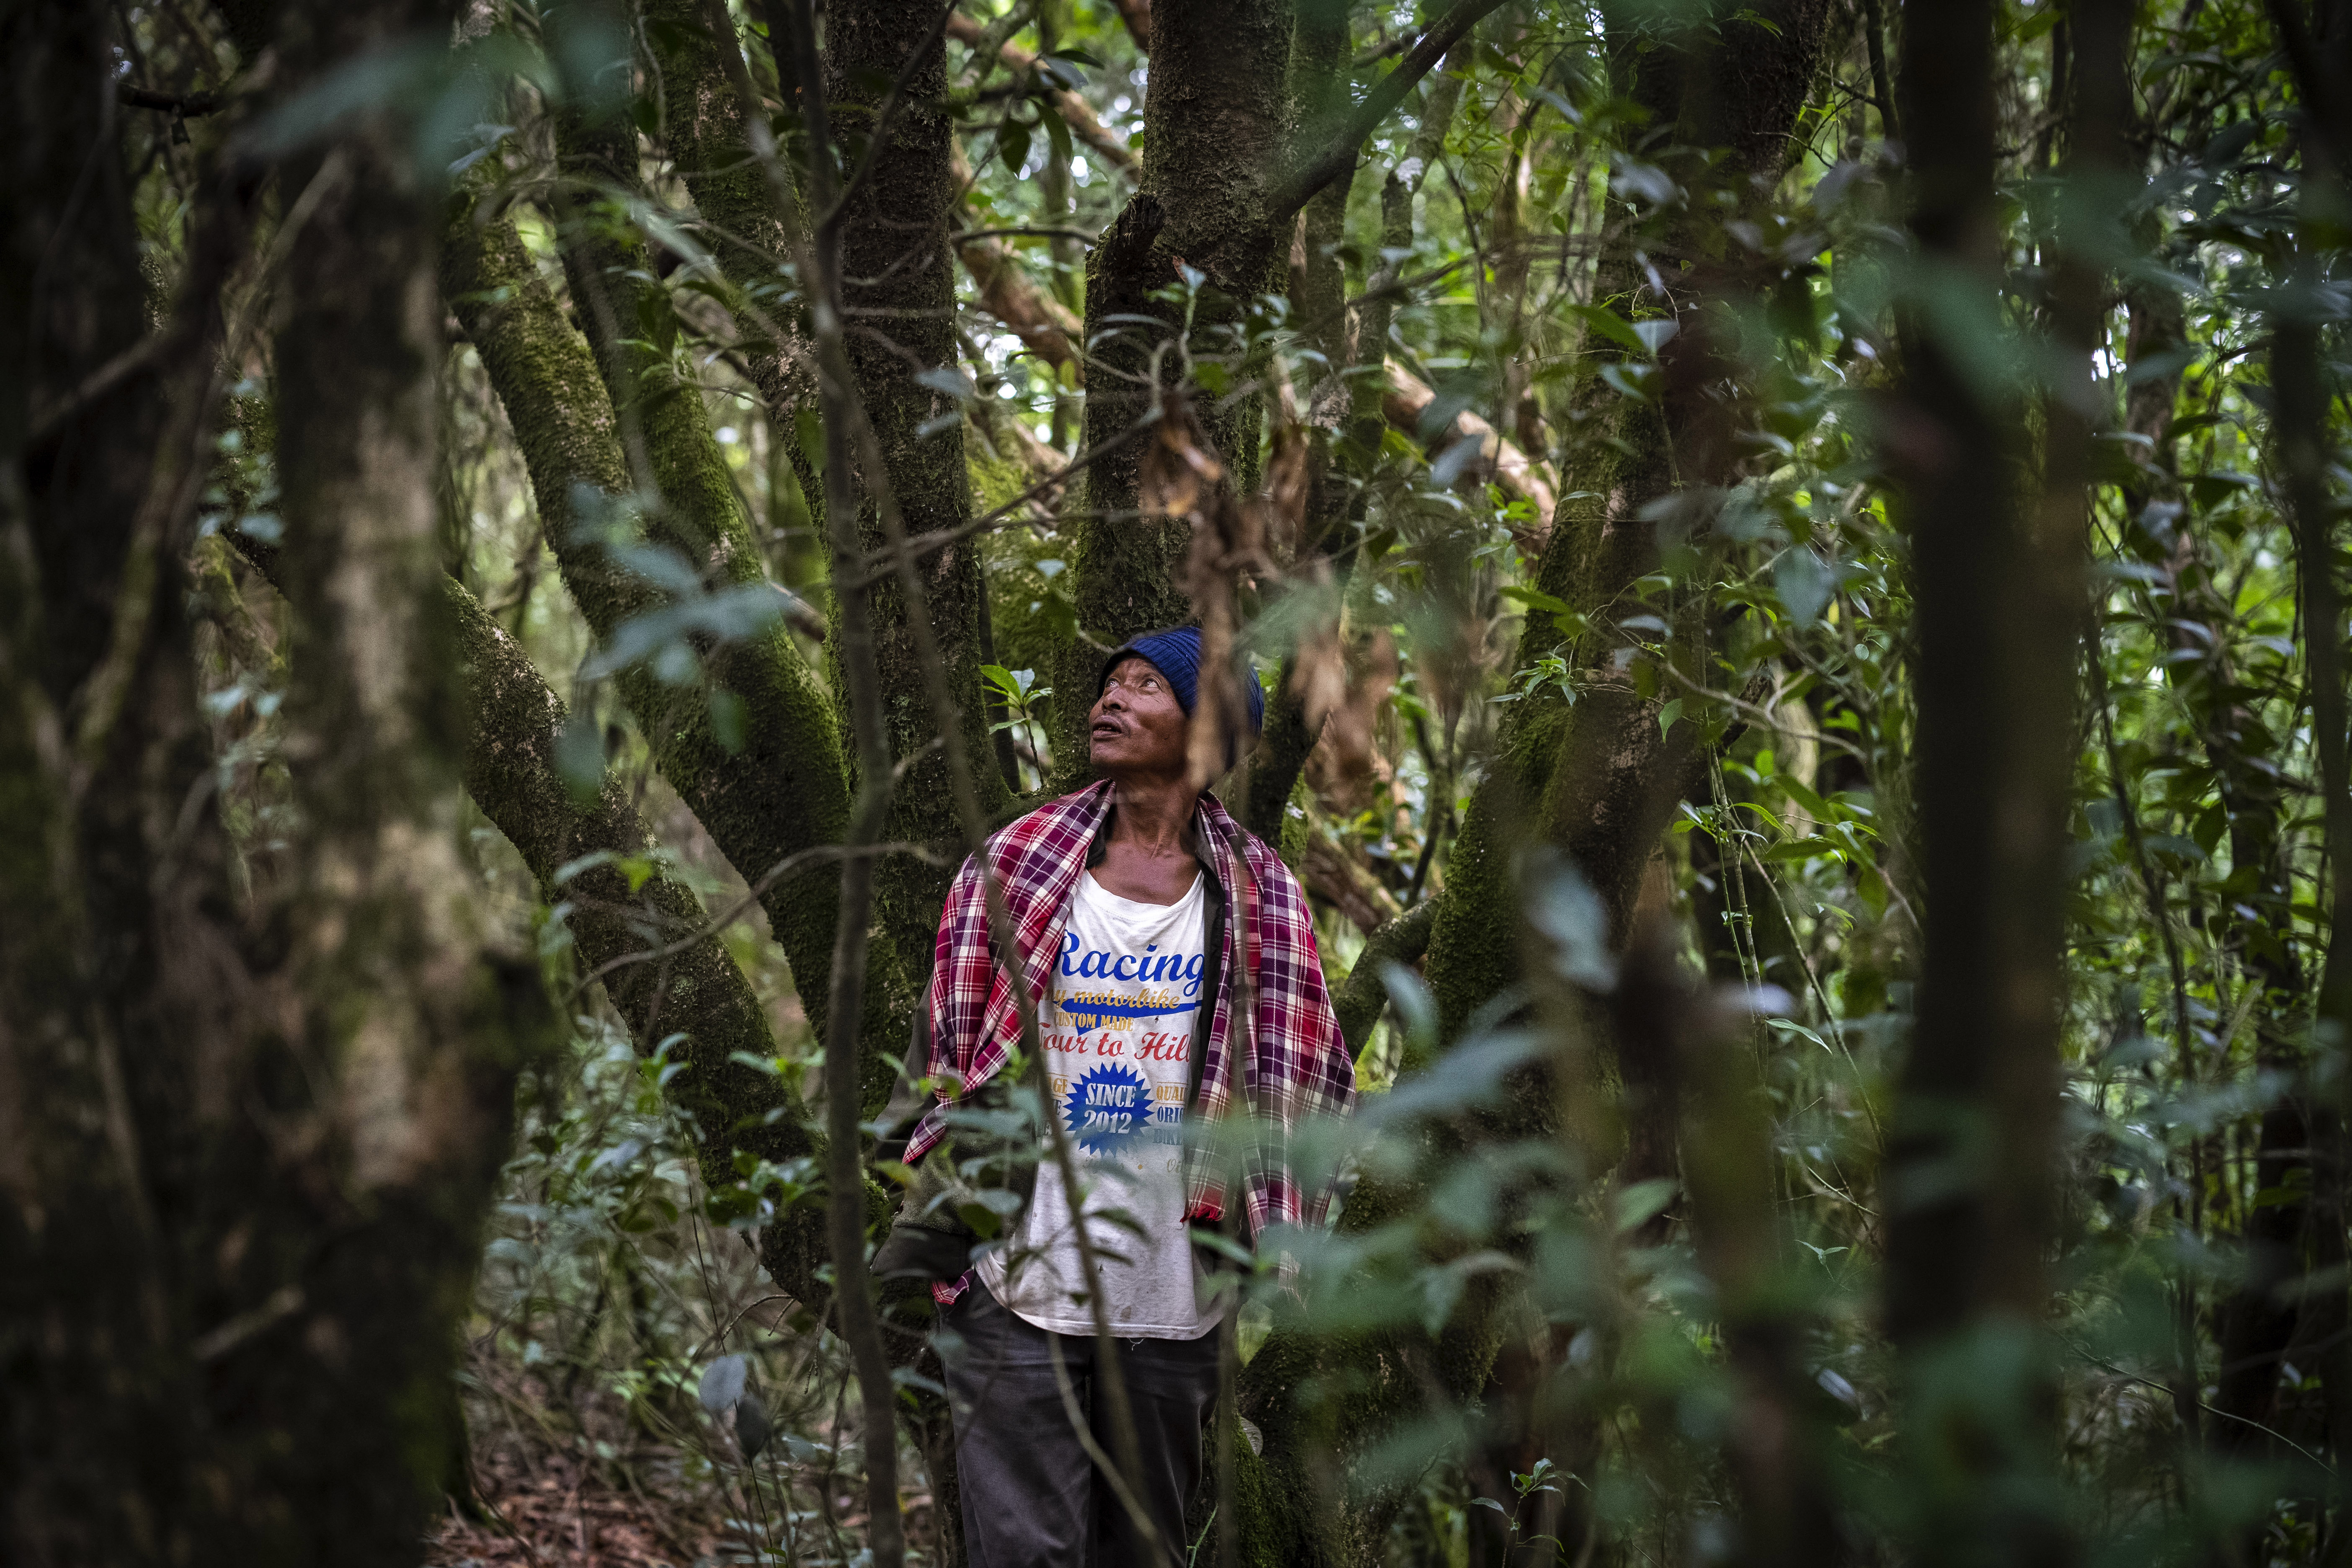 Jiersingh Nongrum is a member of the clan that cares for Swer sacred forest in the East Khasi Hills region of Meghalaya near Cherrapunji, an area about 35 miles southwest of Shillong, which is among the wettest in the world, Thursday, Sept. 7, 2023. (AP Photo/Anupam Nath)